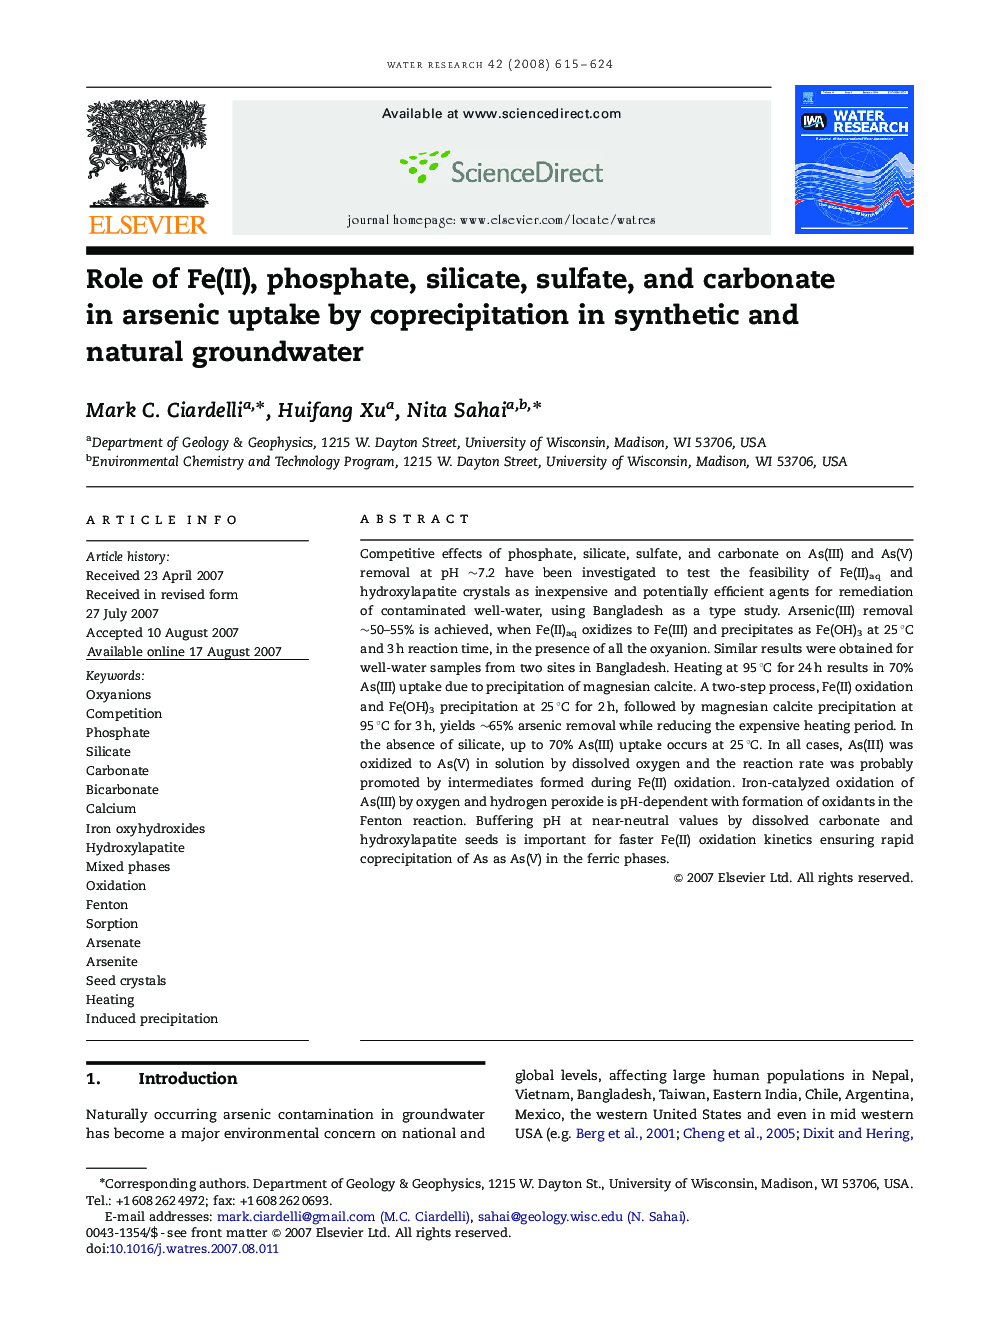 Role of Fe(II), phosphate, silicate, sulfate, and carbonate in arsenic uptake by coprecipitation in synthetic and natural groundwater